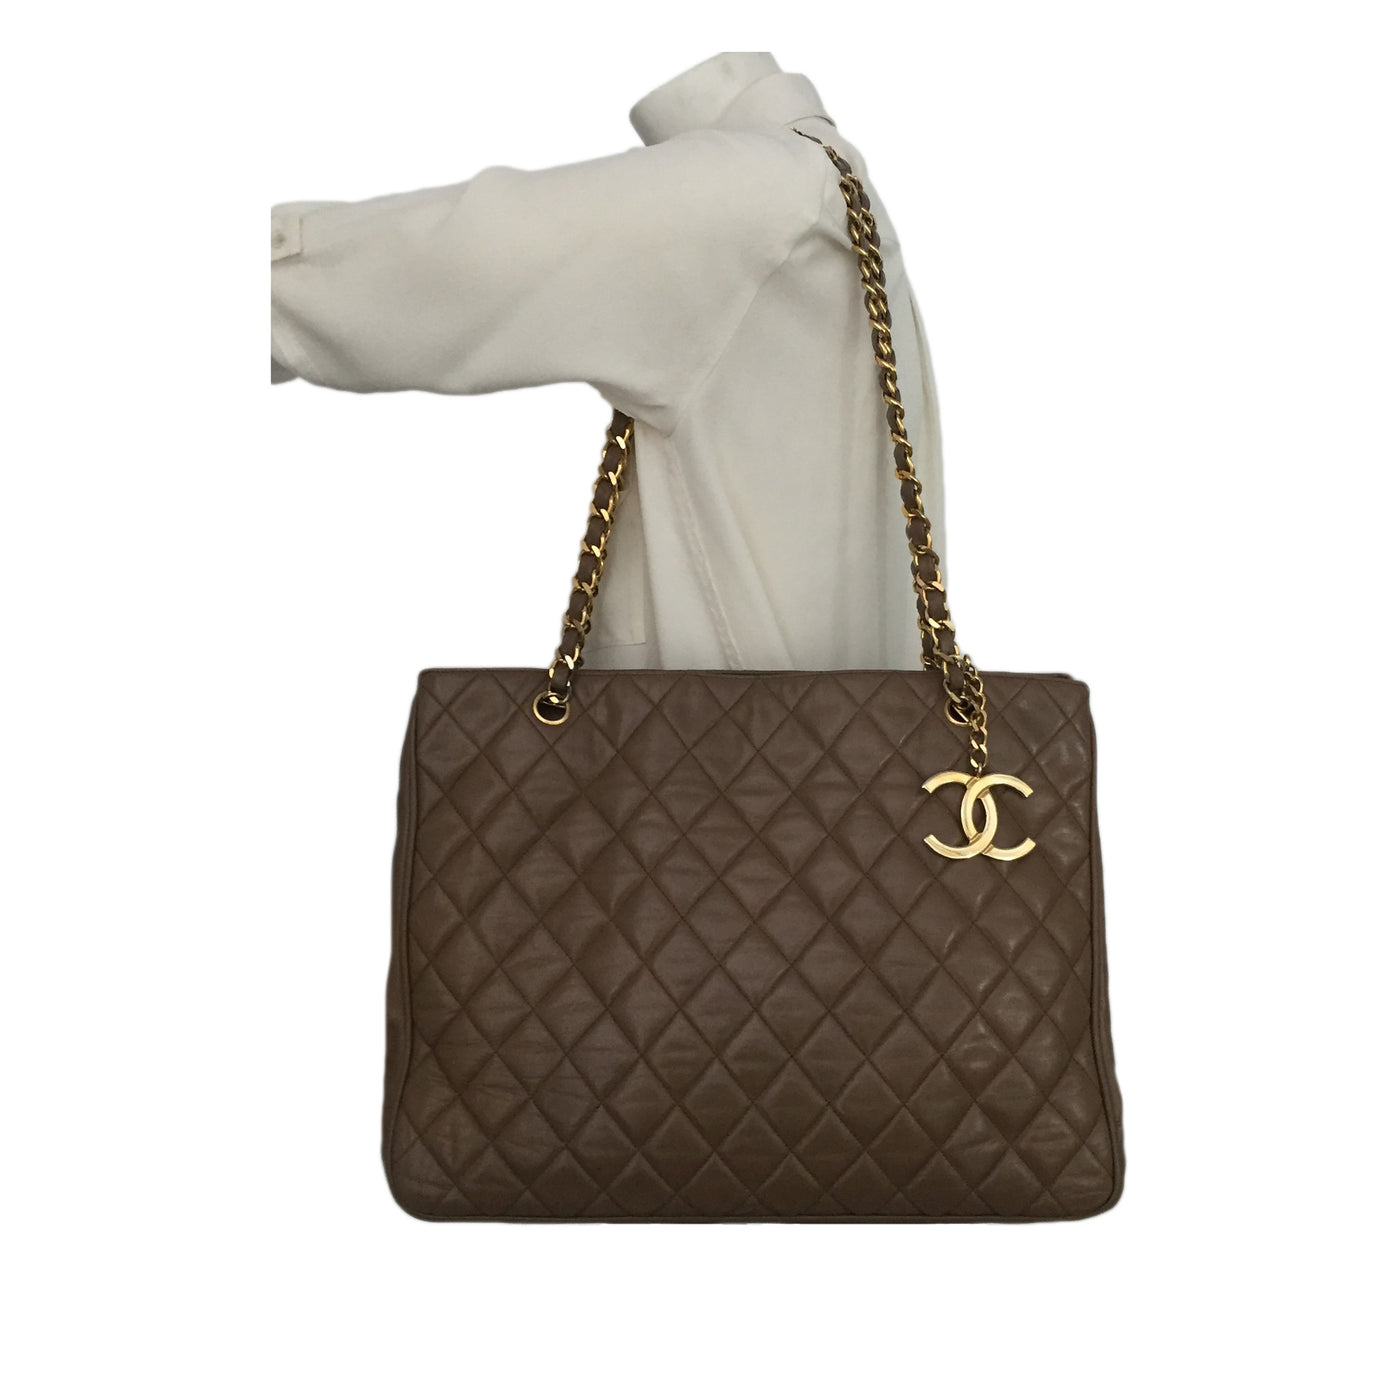 Authentic Chanel Vintage Taupe Quilted Jumbo Tote